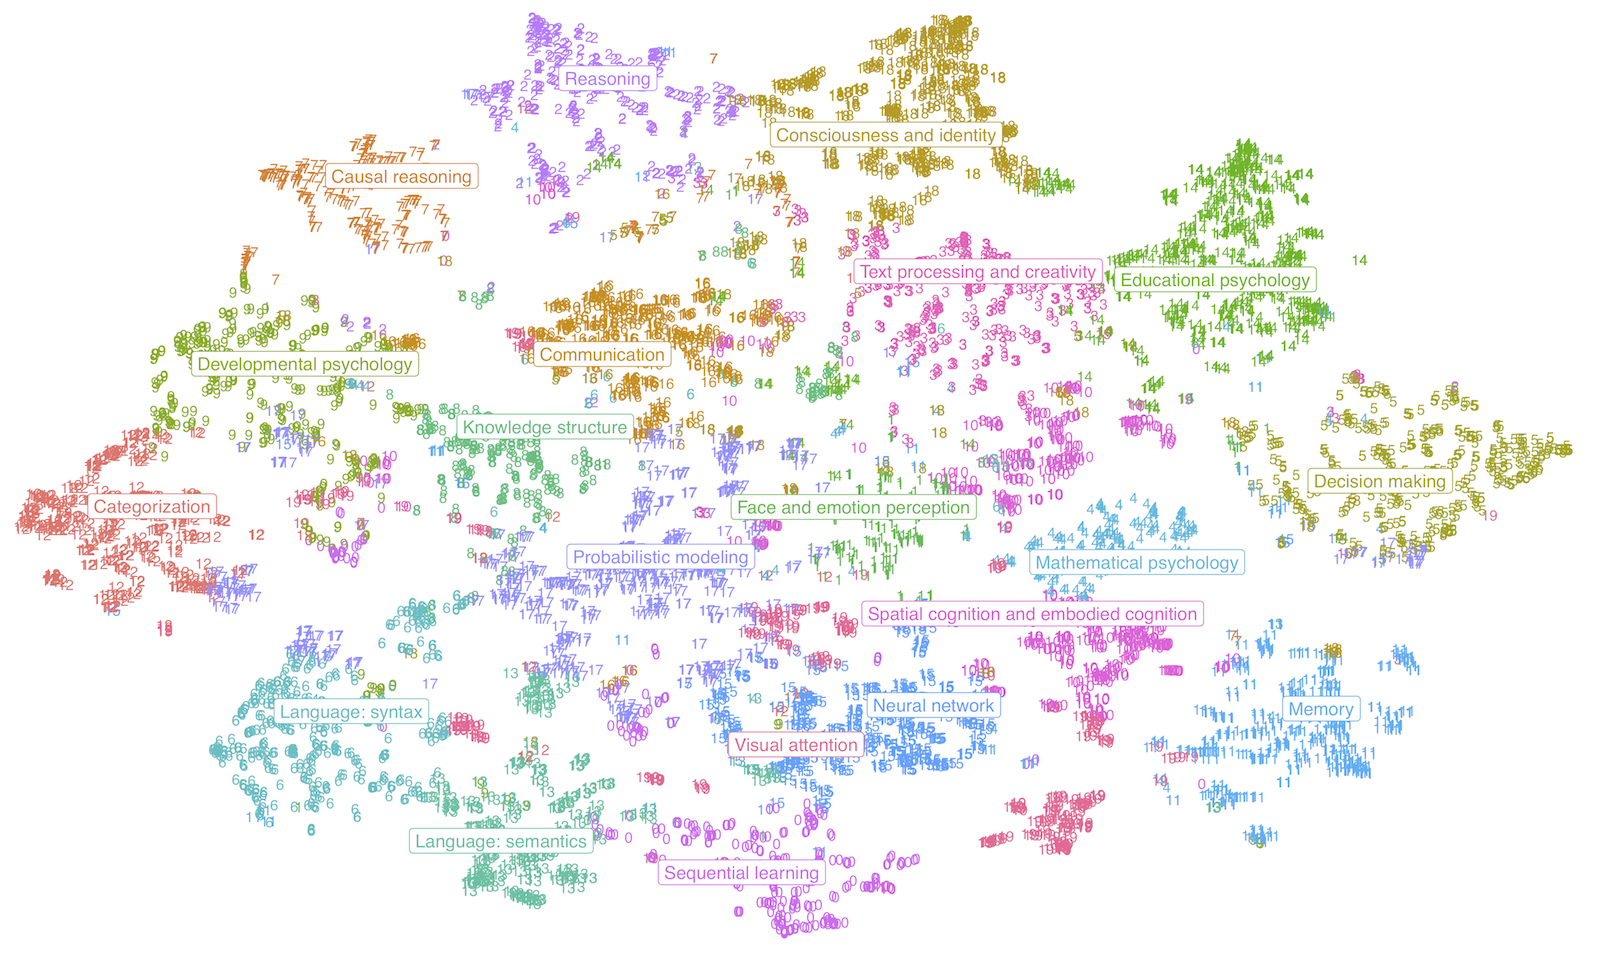 CogSci papers map